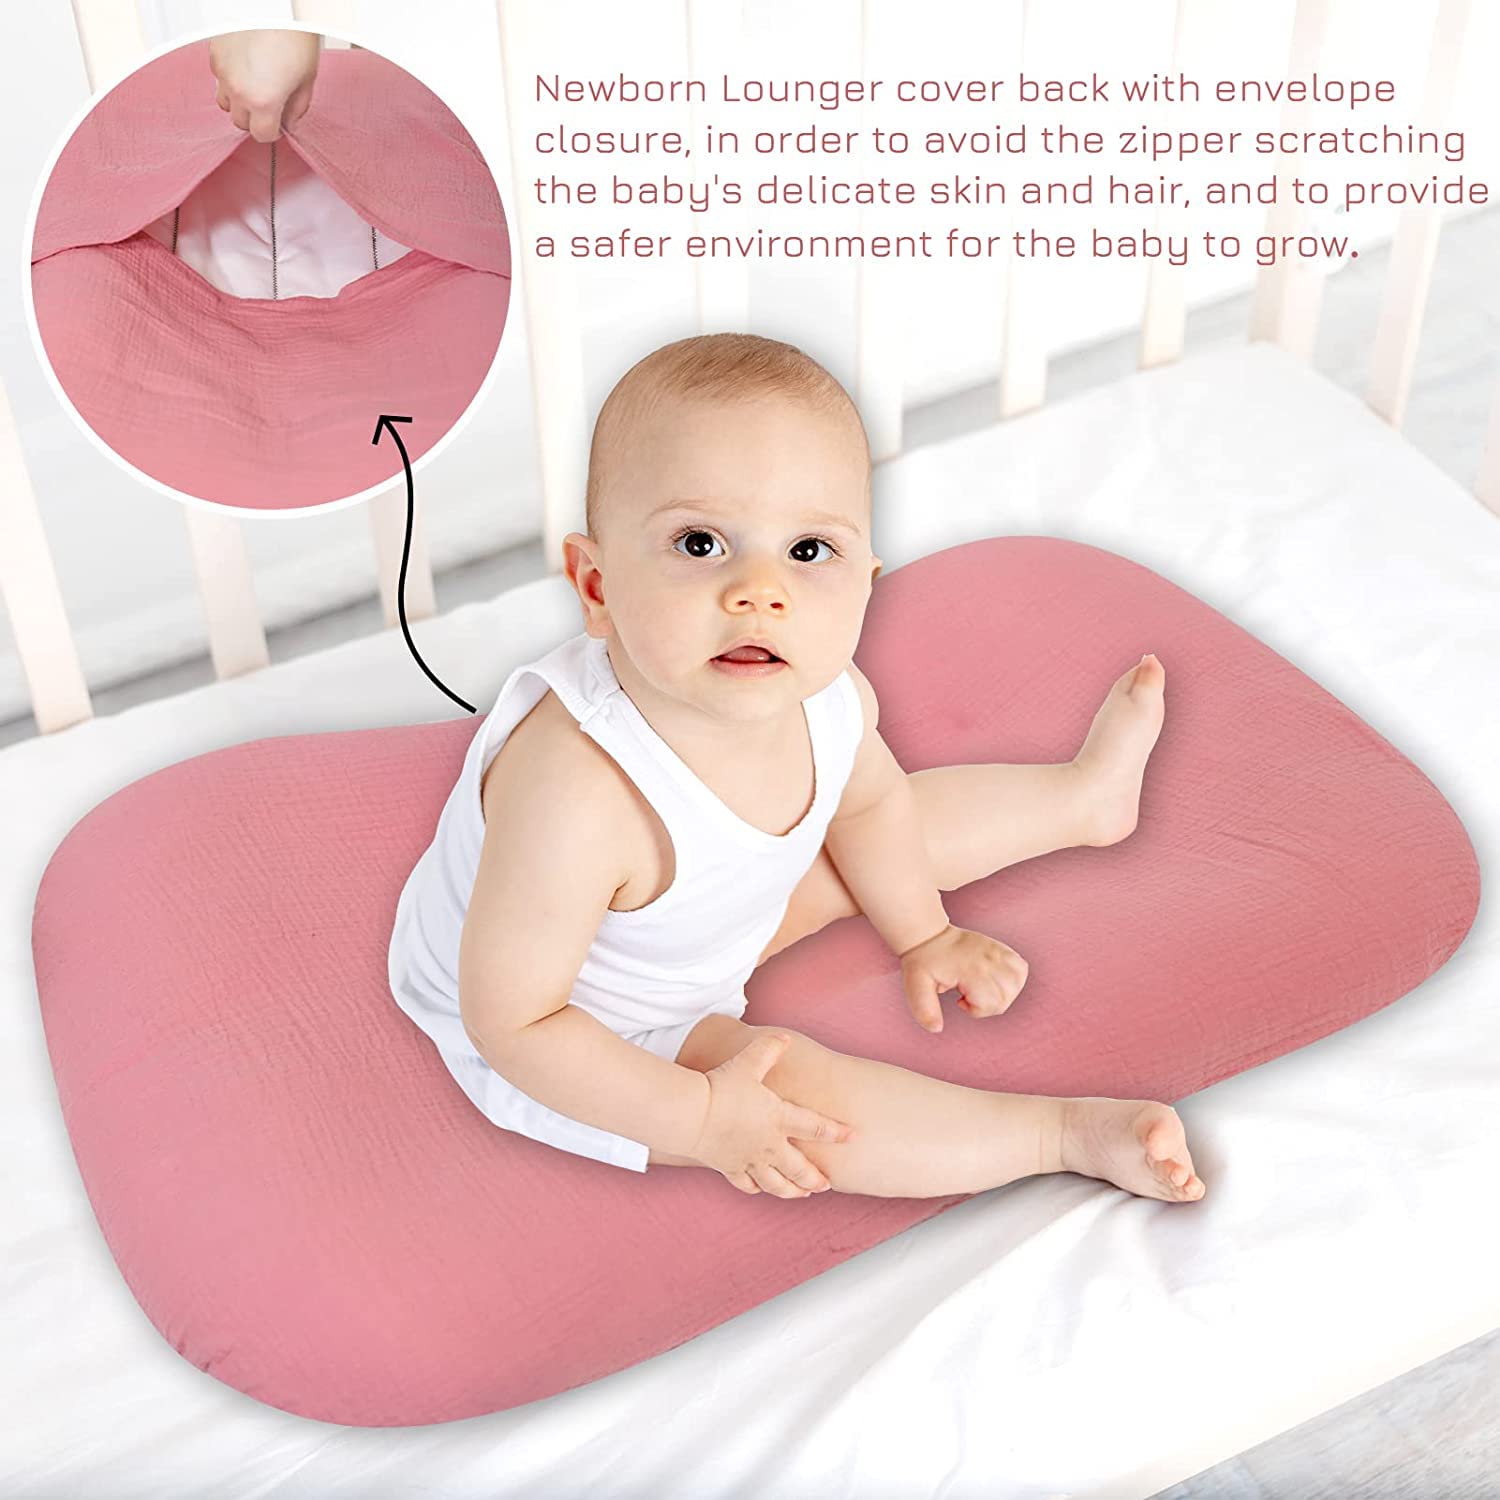 Muslin Baby Lounger Cover 2 Pack, Organic Cotton Removable Slipcover for Newborn,Baby Padded Lounger Infant Floor Seat Cover for Boys Girls (Gray Flesh Pink)